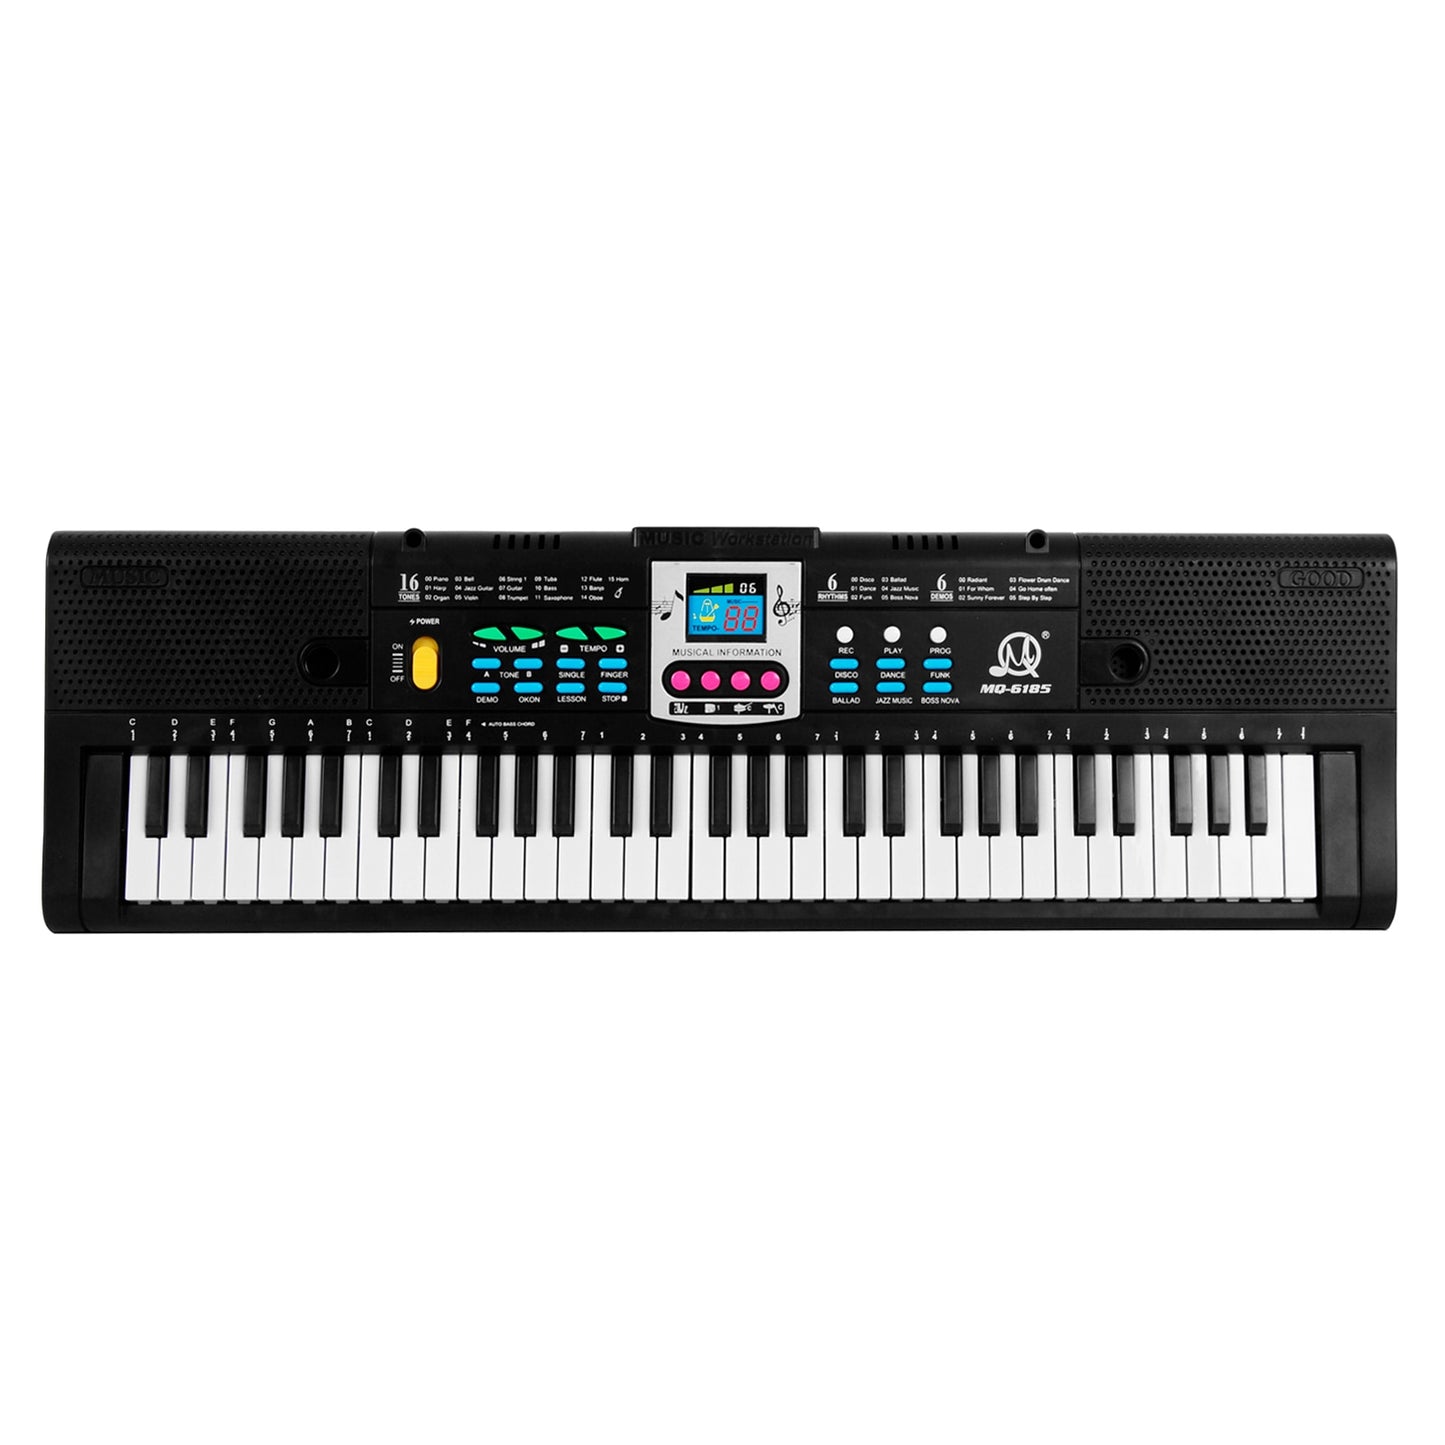 61 Keys Digital Music Electronic Keyboard Kids Multifunctional Electric Piano with Microphone Interface Musical Instrument